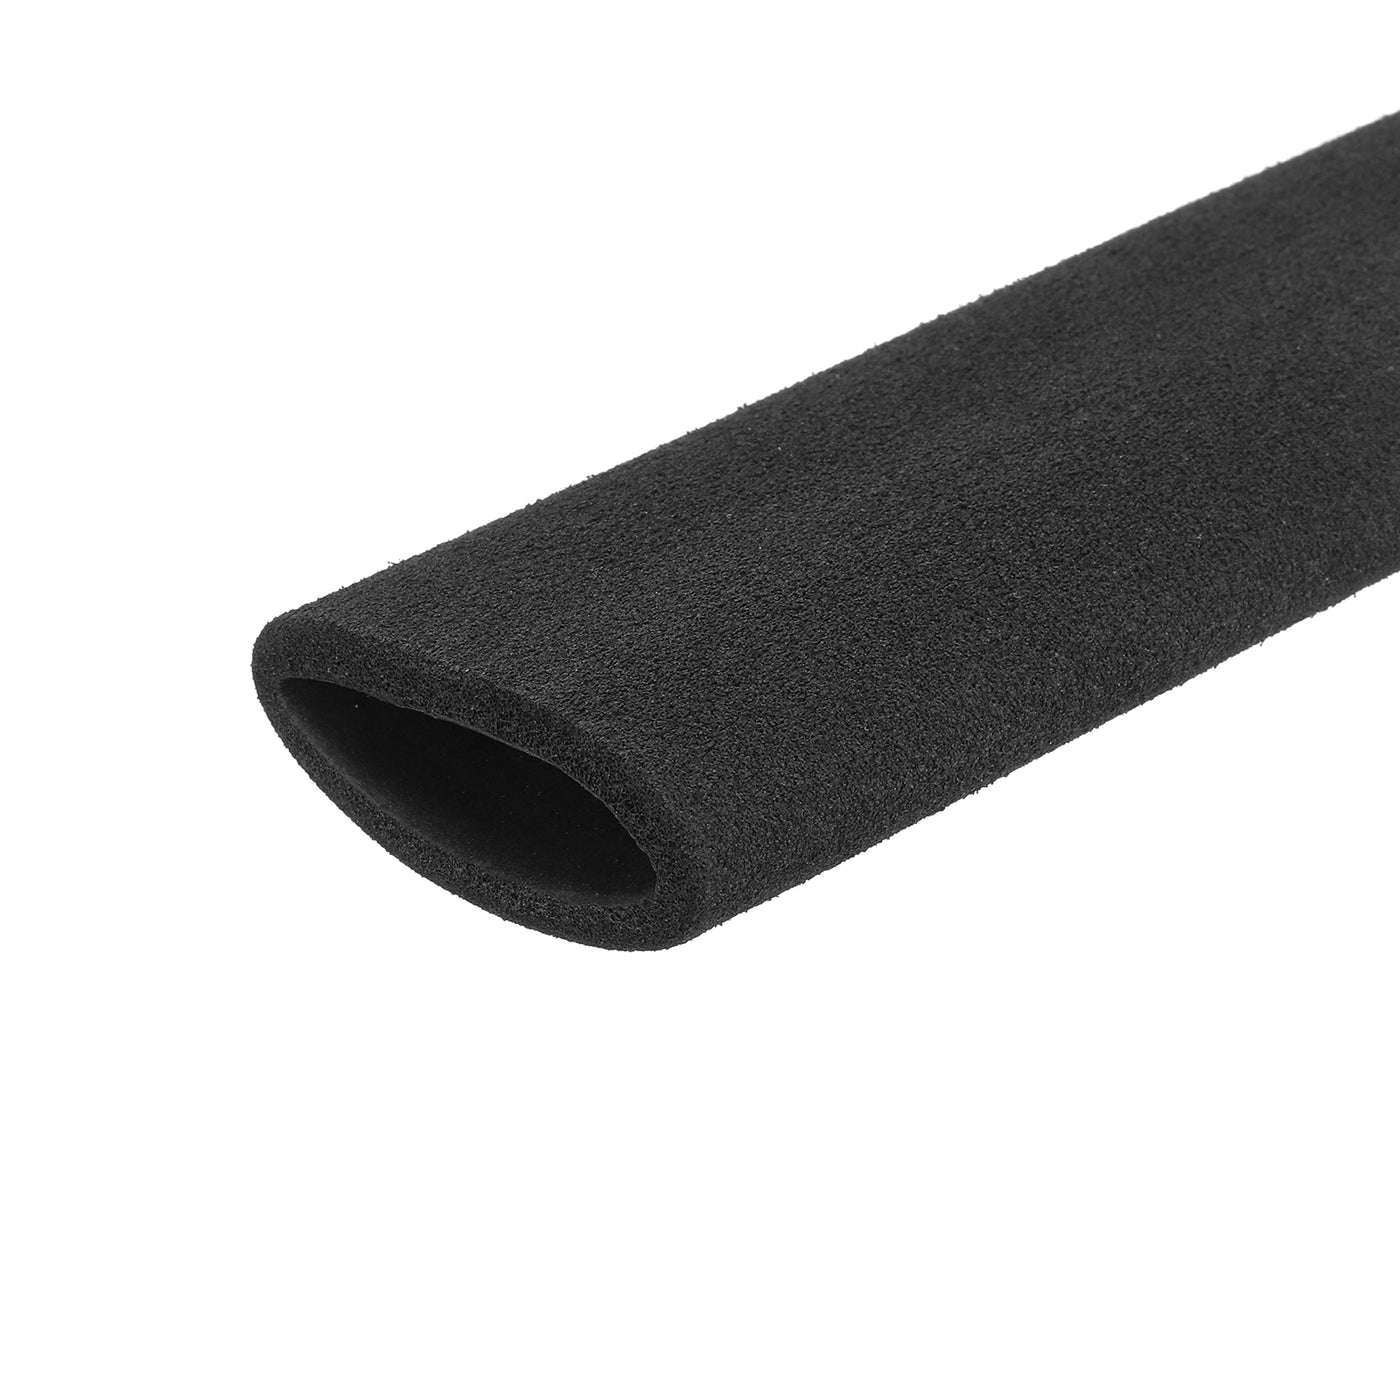 uxcell Uxcell Pipe Insulation Tube Foam Tubing for Handle Grip Support 32mm ID 44mm OD 300mm Heat Preservation Black